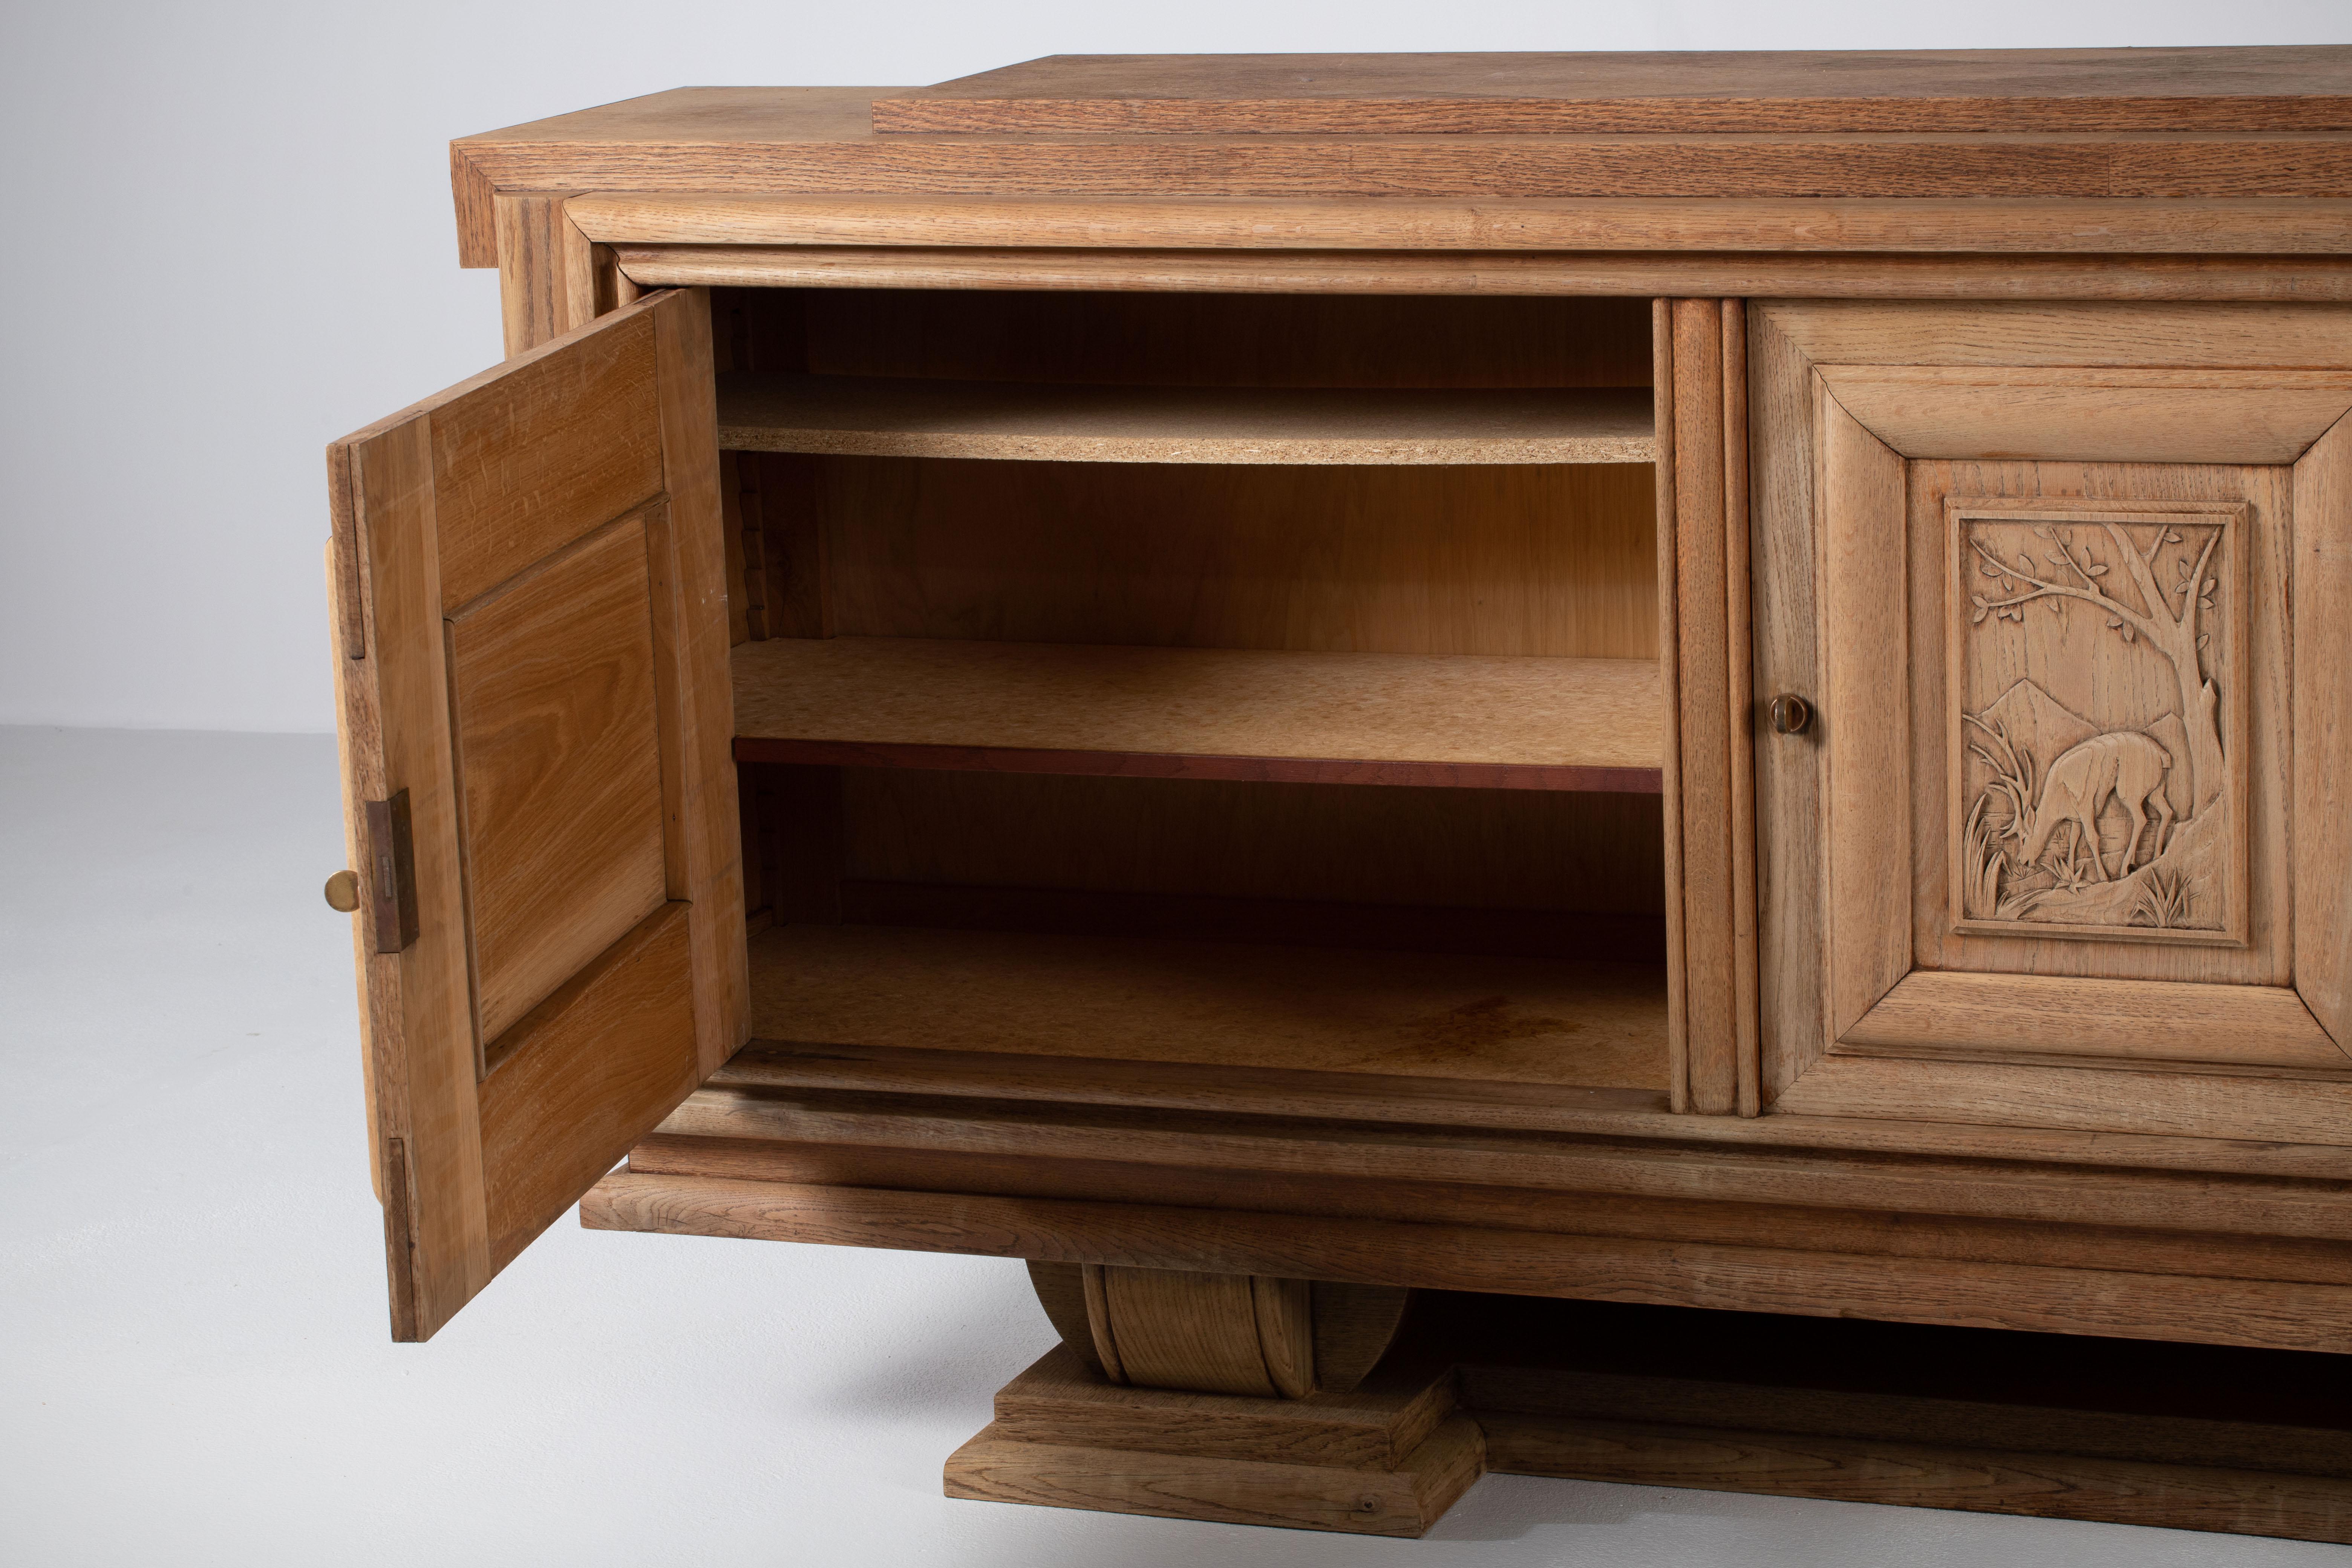 Art Deco Credenza in Solid Oak, Rustic, France, 1940s For Sale 5